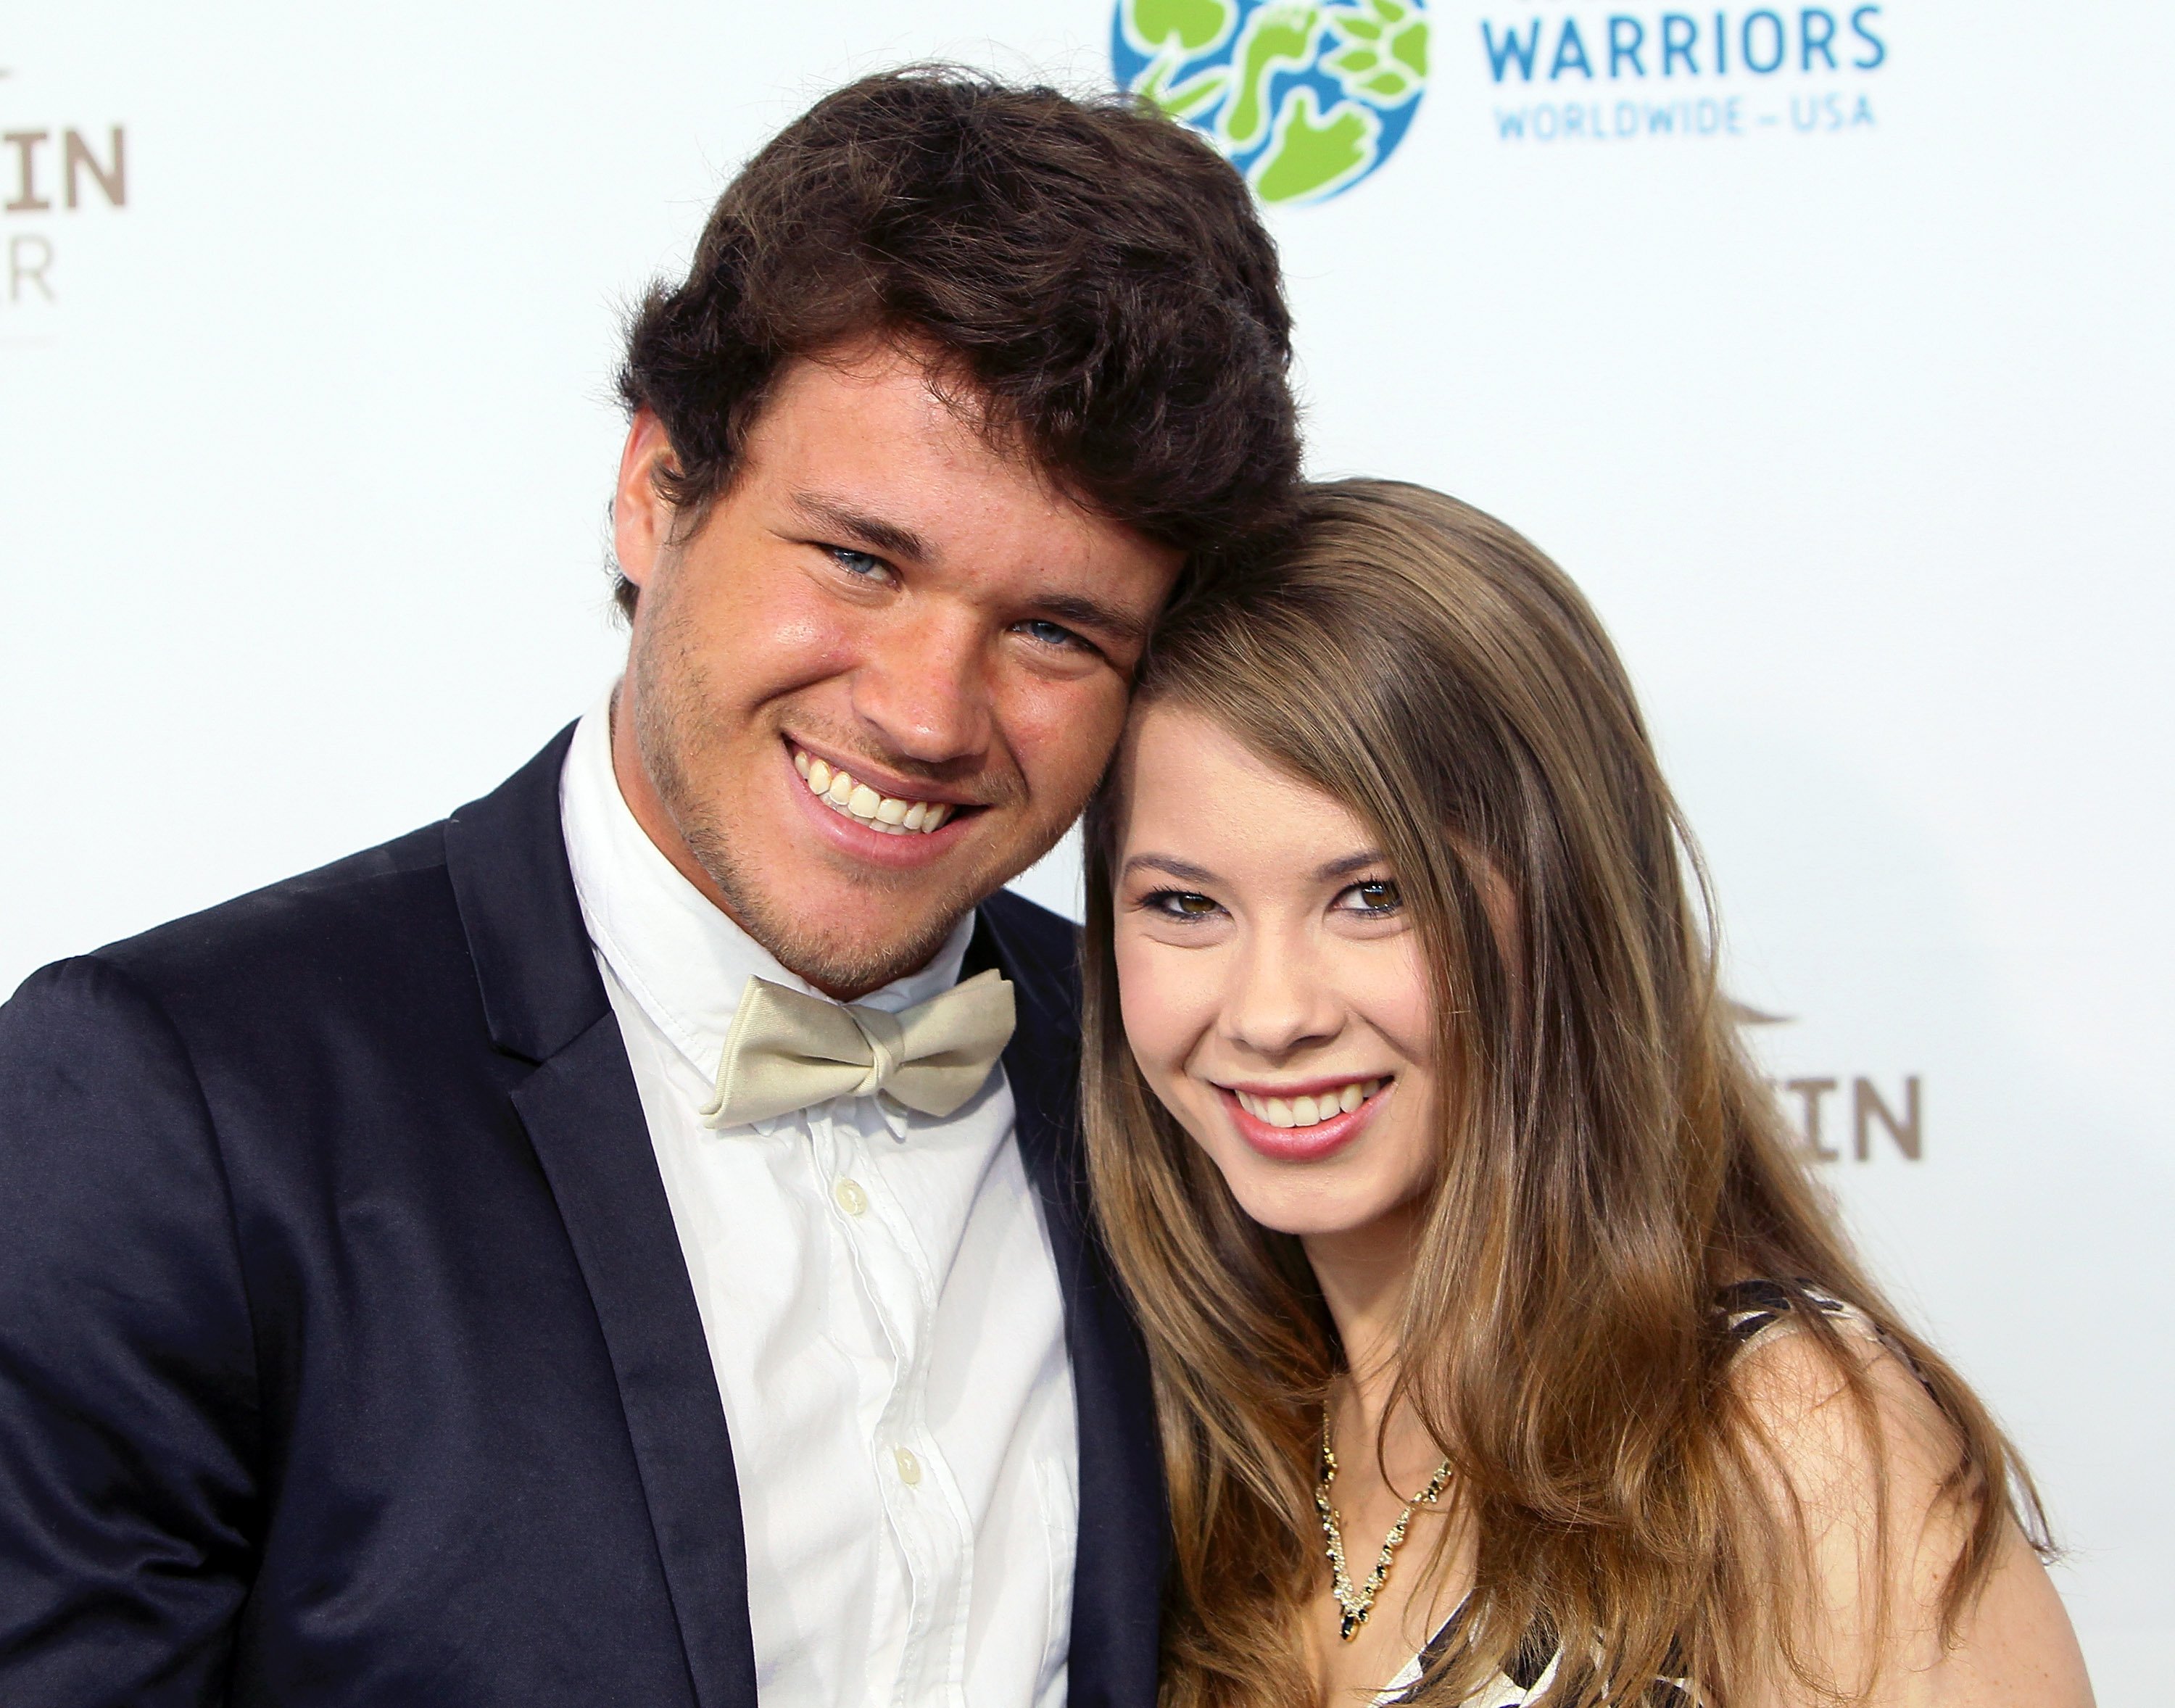 Chandler Powell and Bindi Irwin pictured at the Steve Irwin Gala Dinner at JW Marriott Los Angeles, 2016, California. | Photo: Getty Images